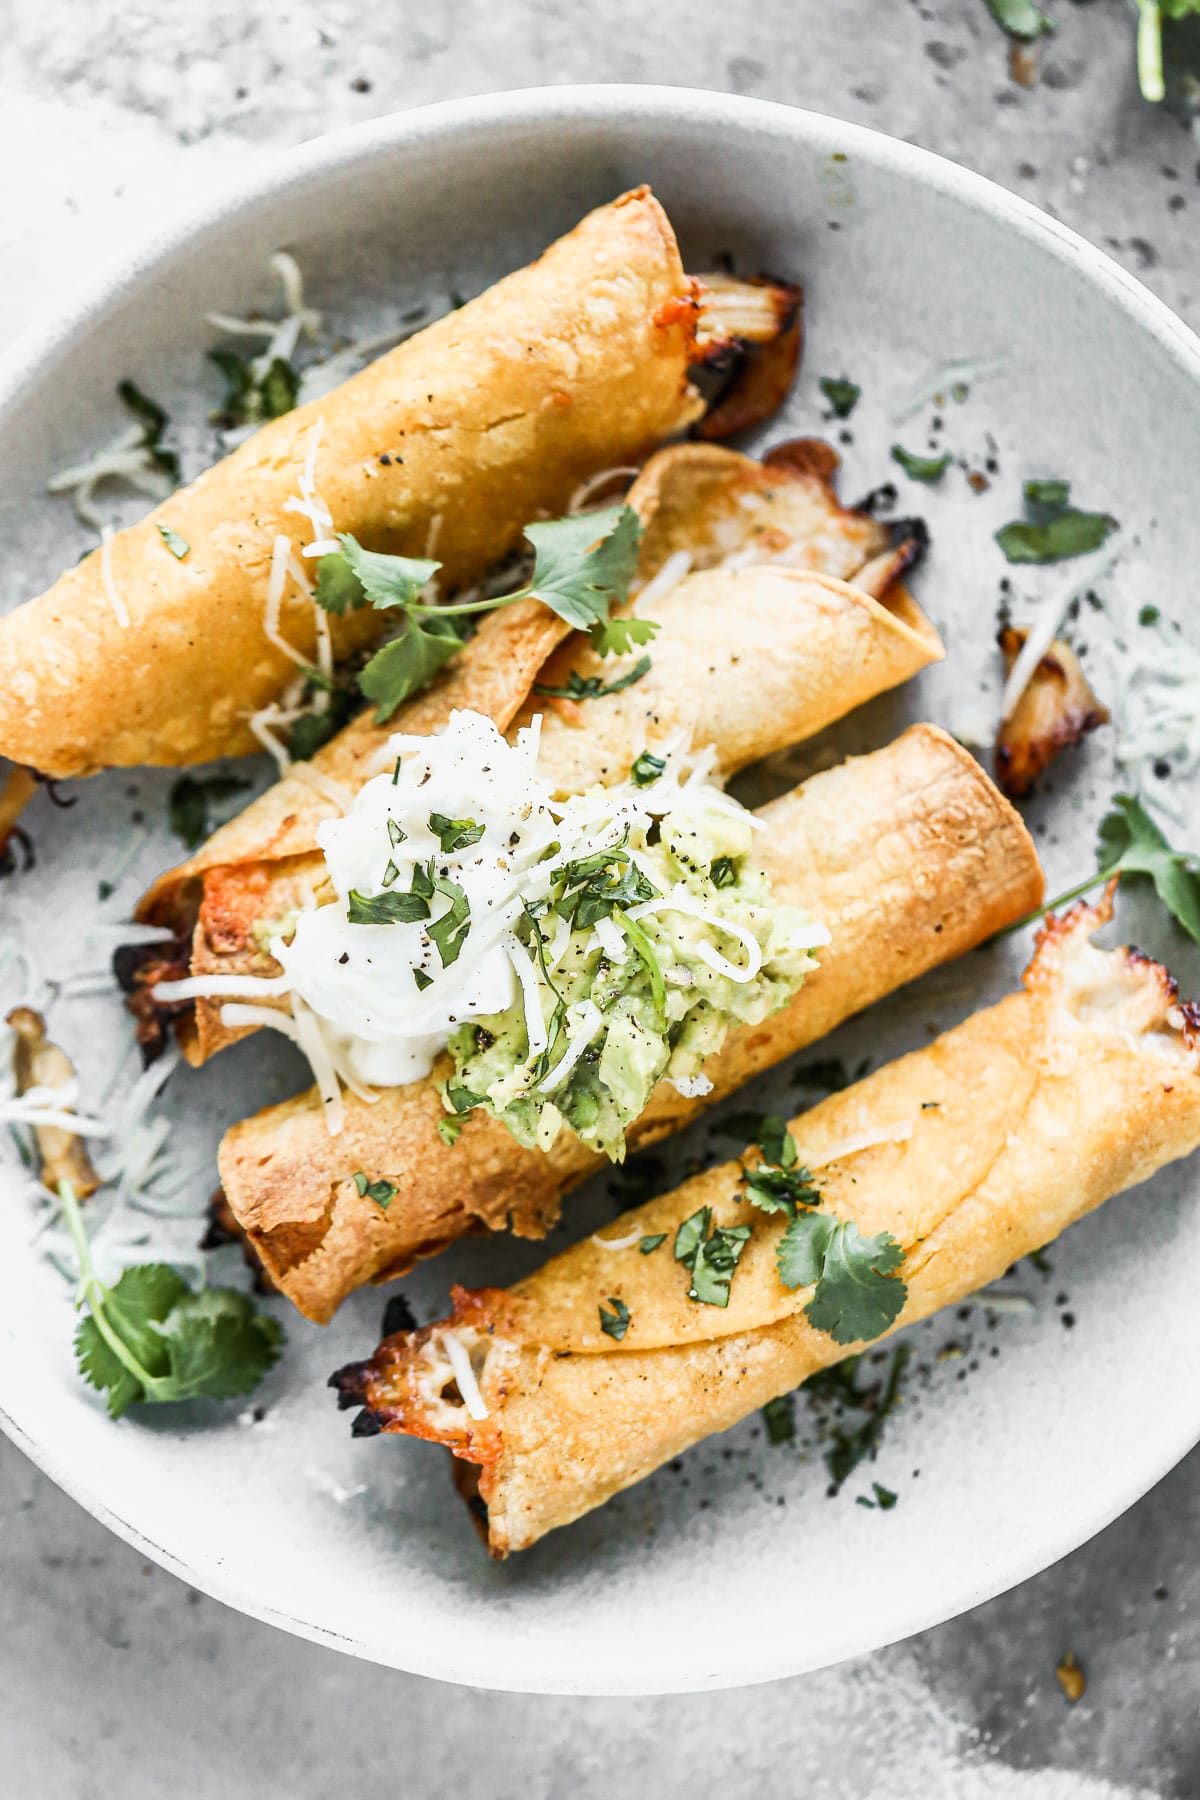 Irresistibly crispy on the outside and filled with shredded honey lime chicken and plenty of melted monterey jack cheese on the inside, our Air Fryer Taquitos are the perfect Game Day snack. Serve shredded cheese, an easy guac and plenty of lime sour cream to finish them off. 